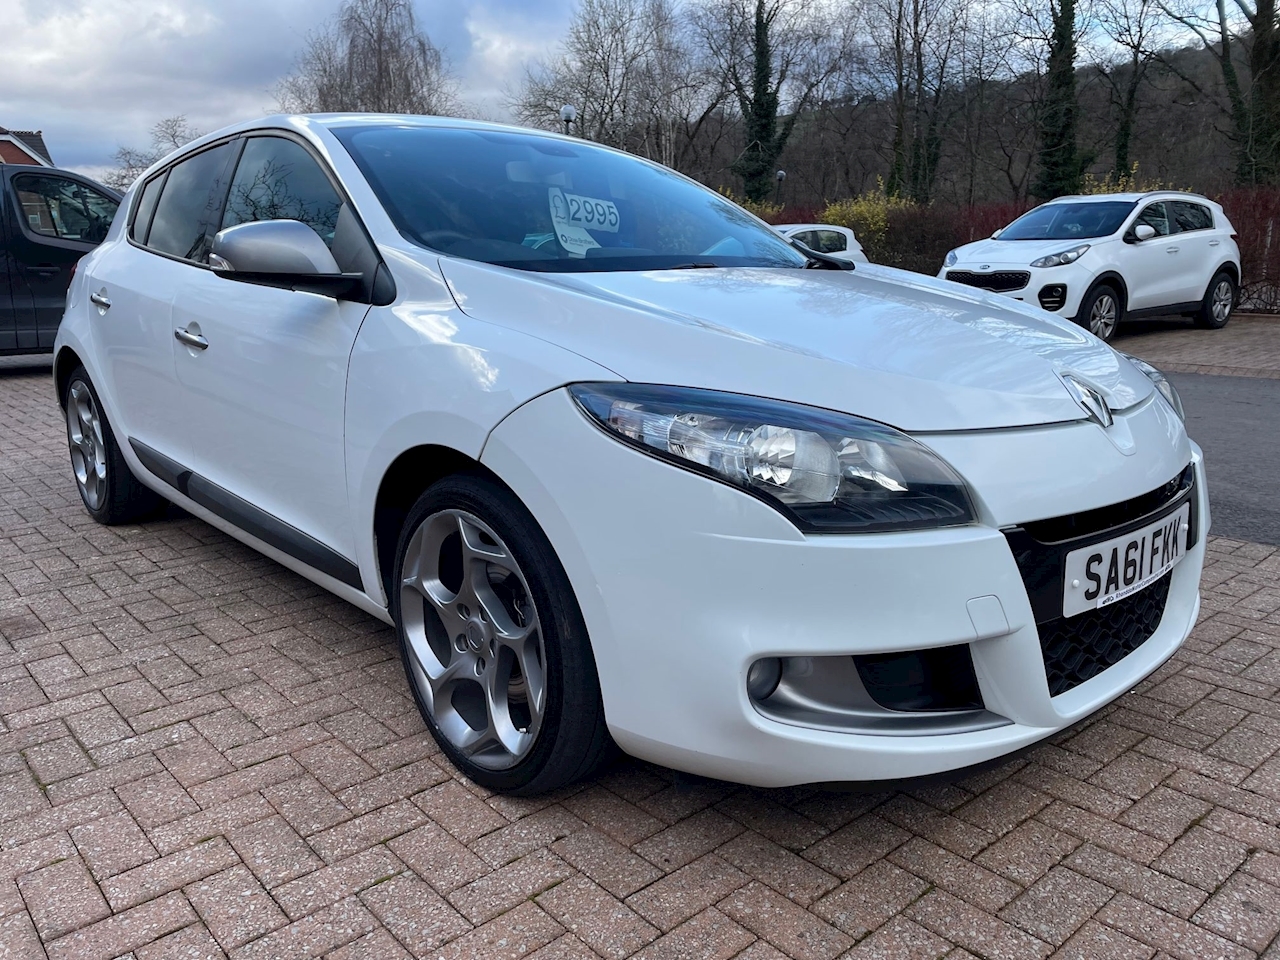 Renault Mégane 2 RS 2.0l Turbo 225cv Pack Luxe - Cazor Auto Passion